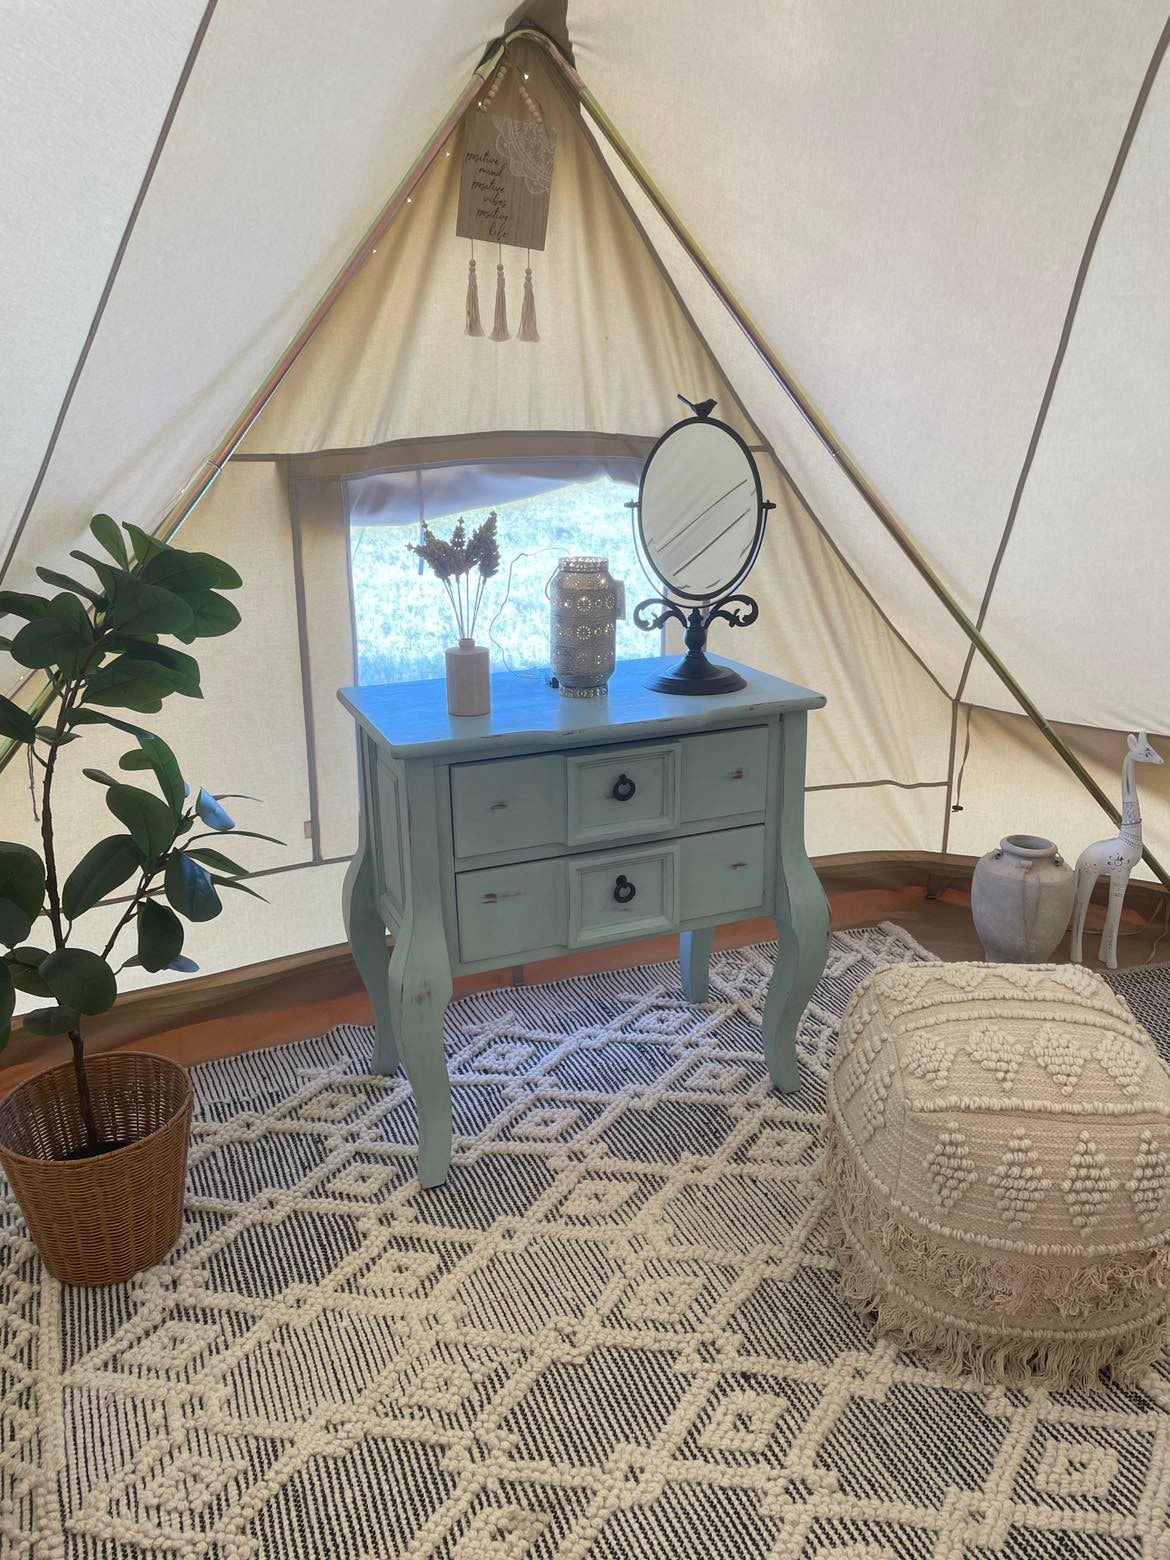 Star Nest Glamping Stable Tent